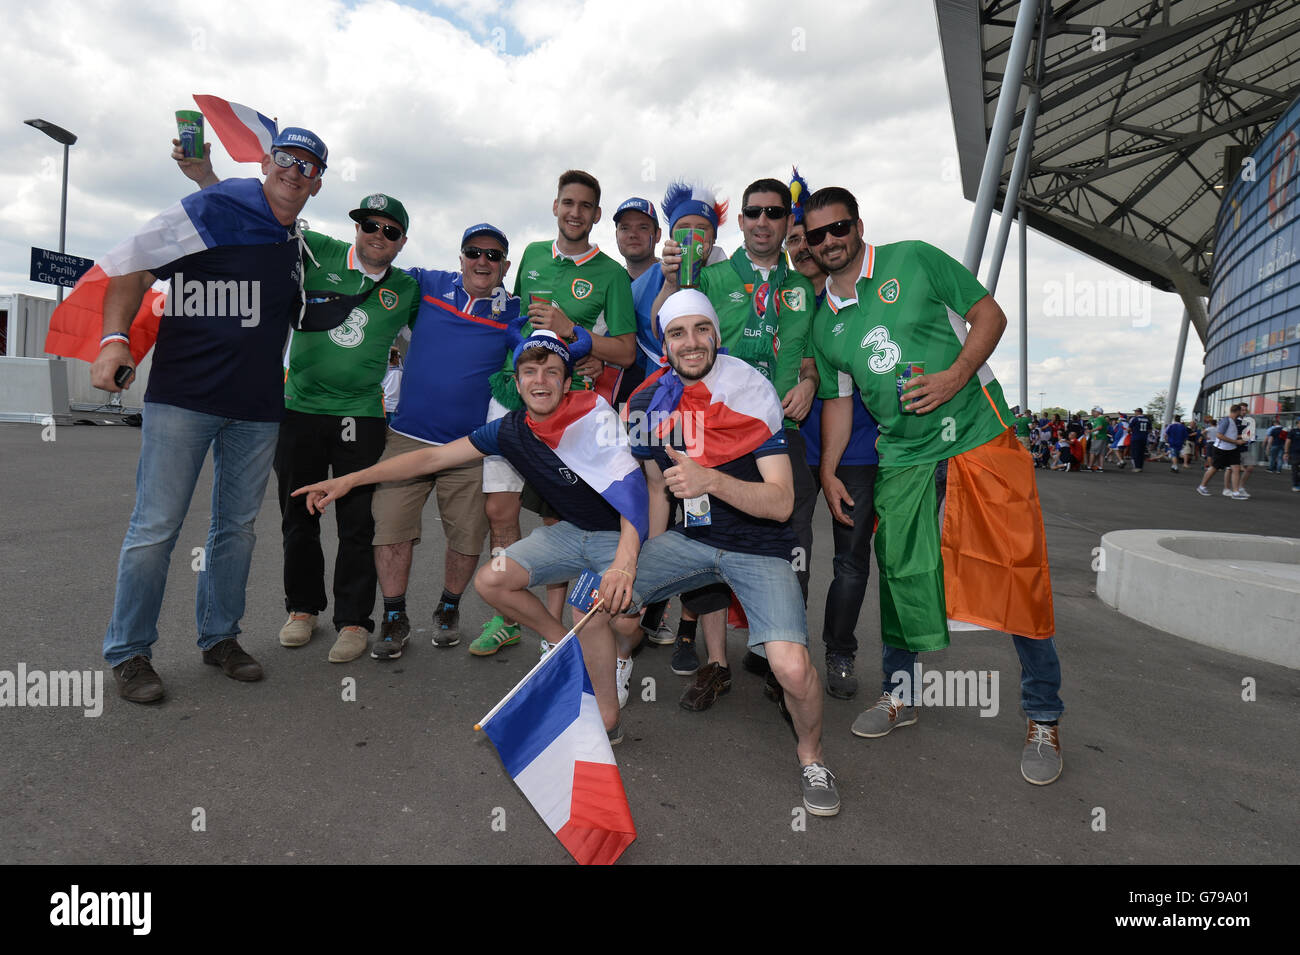 26.06.2016. Lyon, France. UEFA European 2016 Football Championships, last 16. France versus Republic of Ireland.  Supporters of both teams in fancy dress Stock Photo